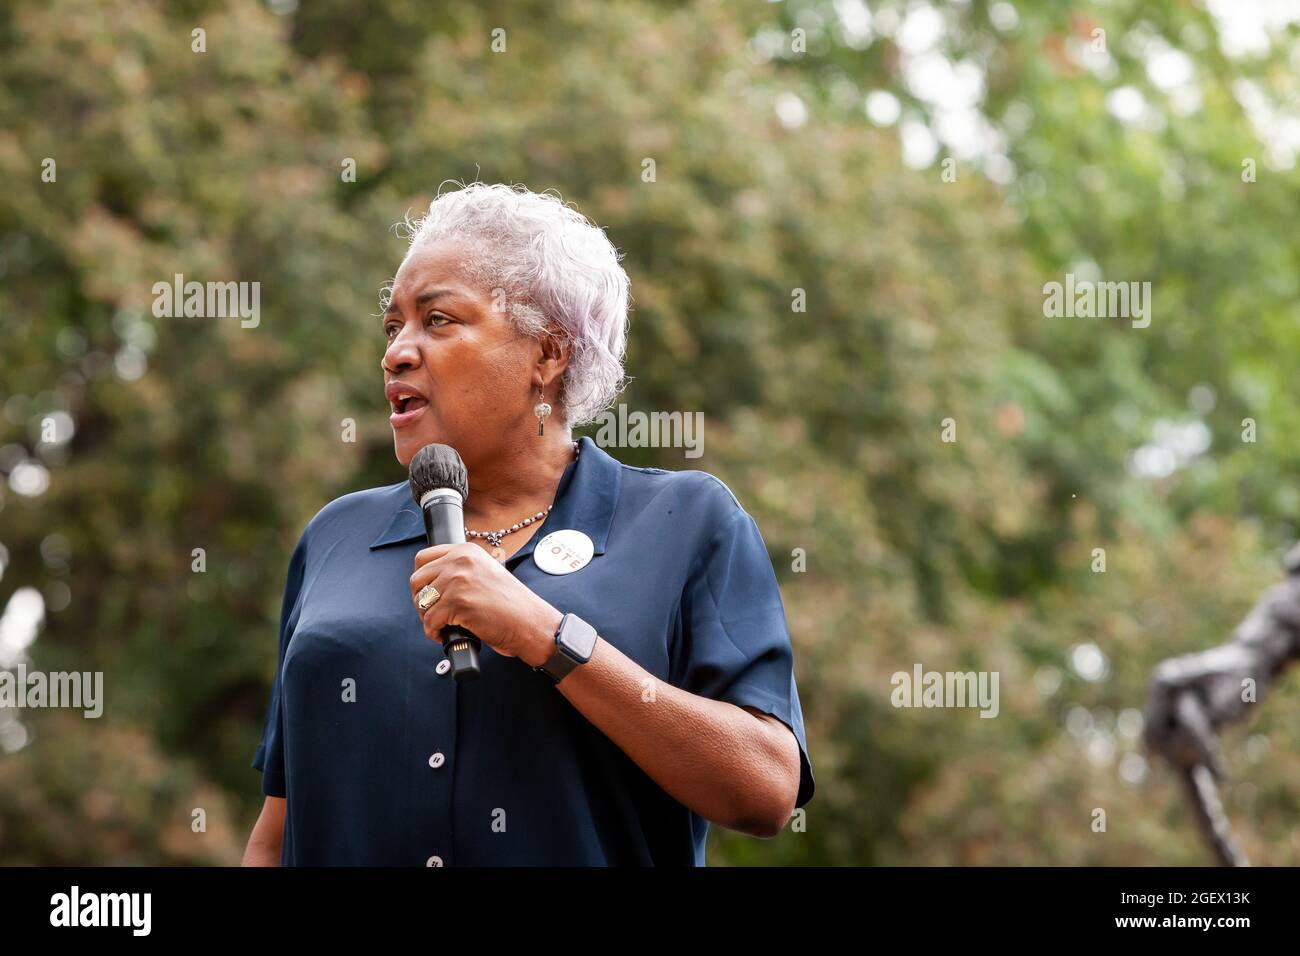 Washington, DC, USA, 21 August, 2021.  Pictured: ABC News commentator and former chair of the Democratic National Committee, Donna Brazile, speaks during a voting rights protest on Capitol Hill.  The rally was hosted by Fighting for Our Vote, a coalition of the ACLU, NAACP, and other organizations.  Speakers included members and leadership of several unions, all of whom stressed the need to keep fighting for voting rights.  Credit: Allison Bailey / Alamy Live News Stock Photo